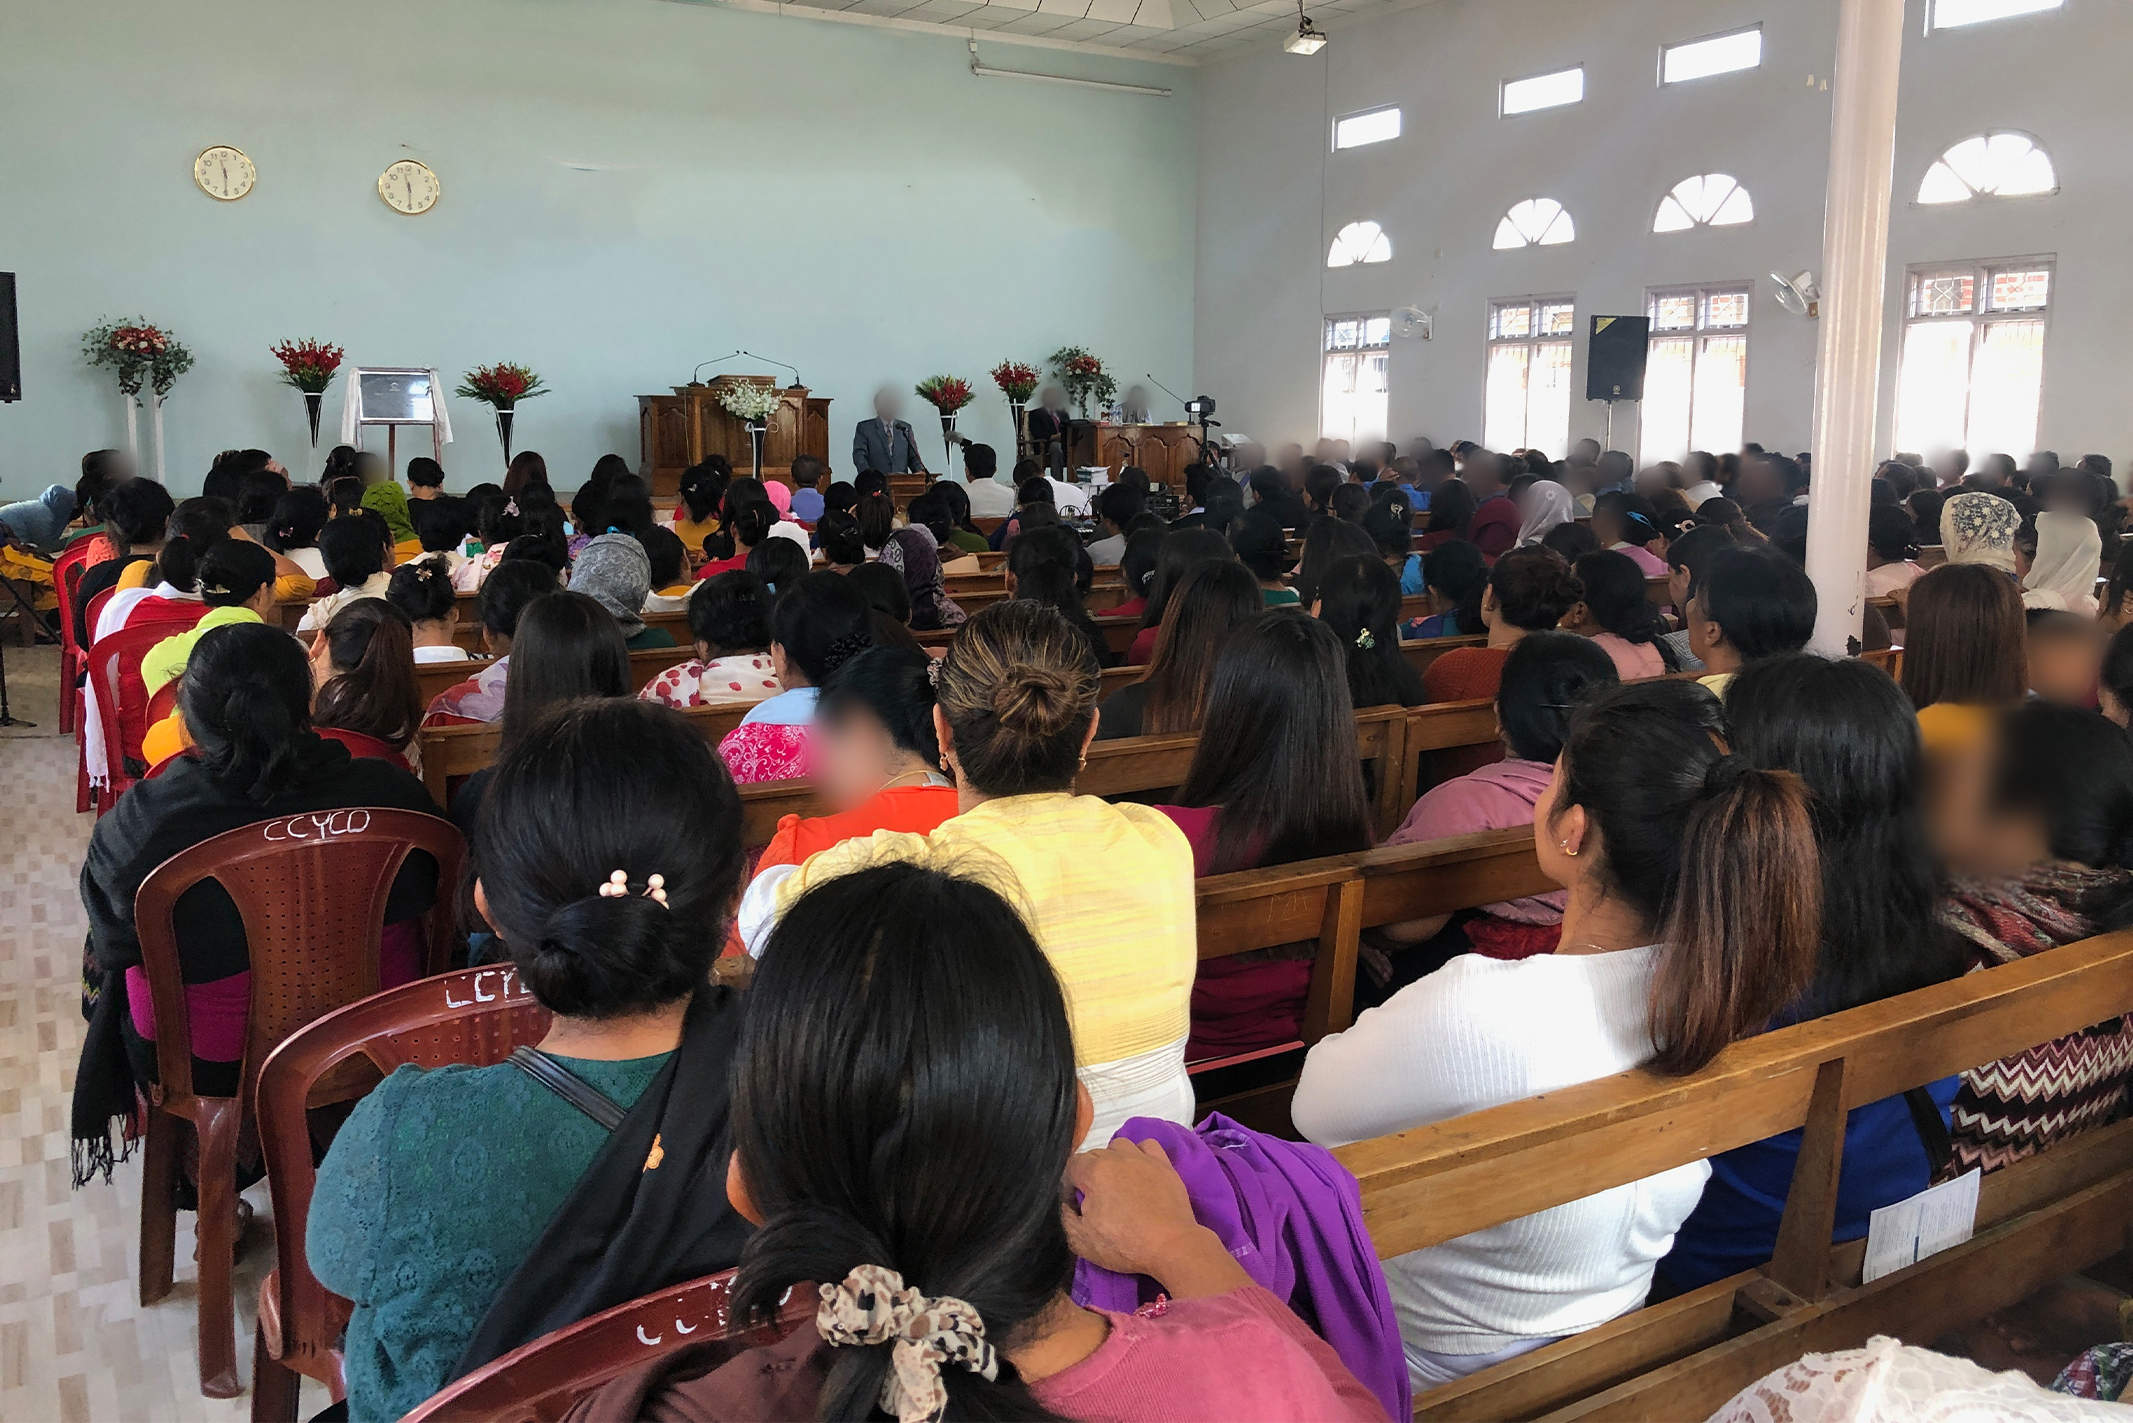 Christians in South Asia gather in their church for service sitting on wooden pews looking at their pastor preaching